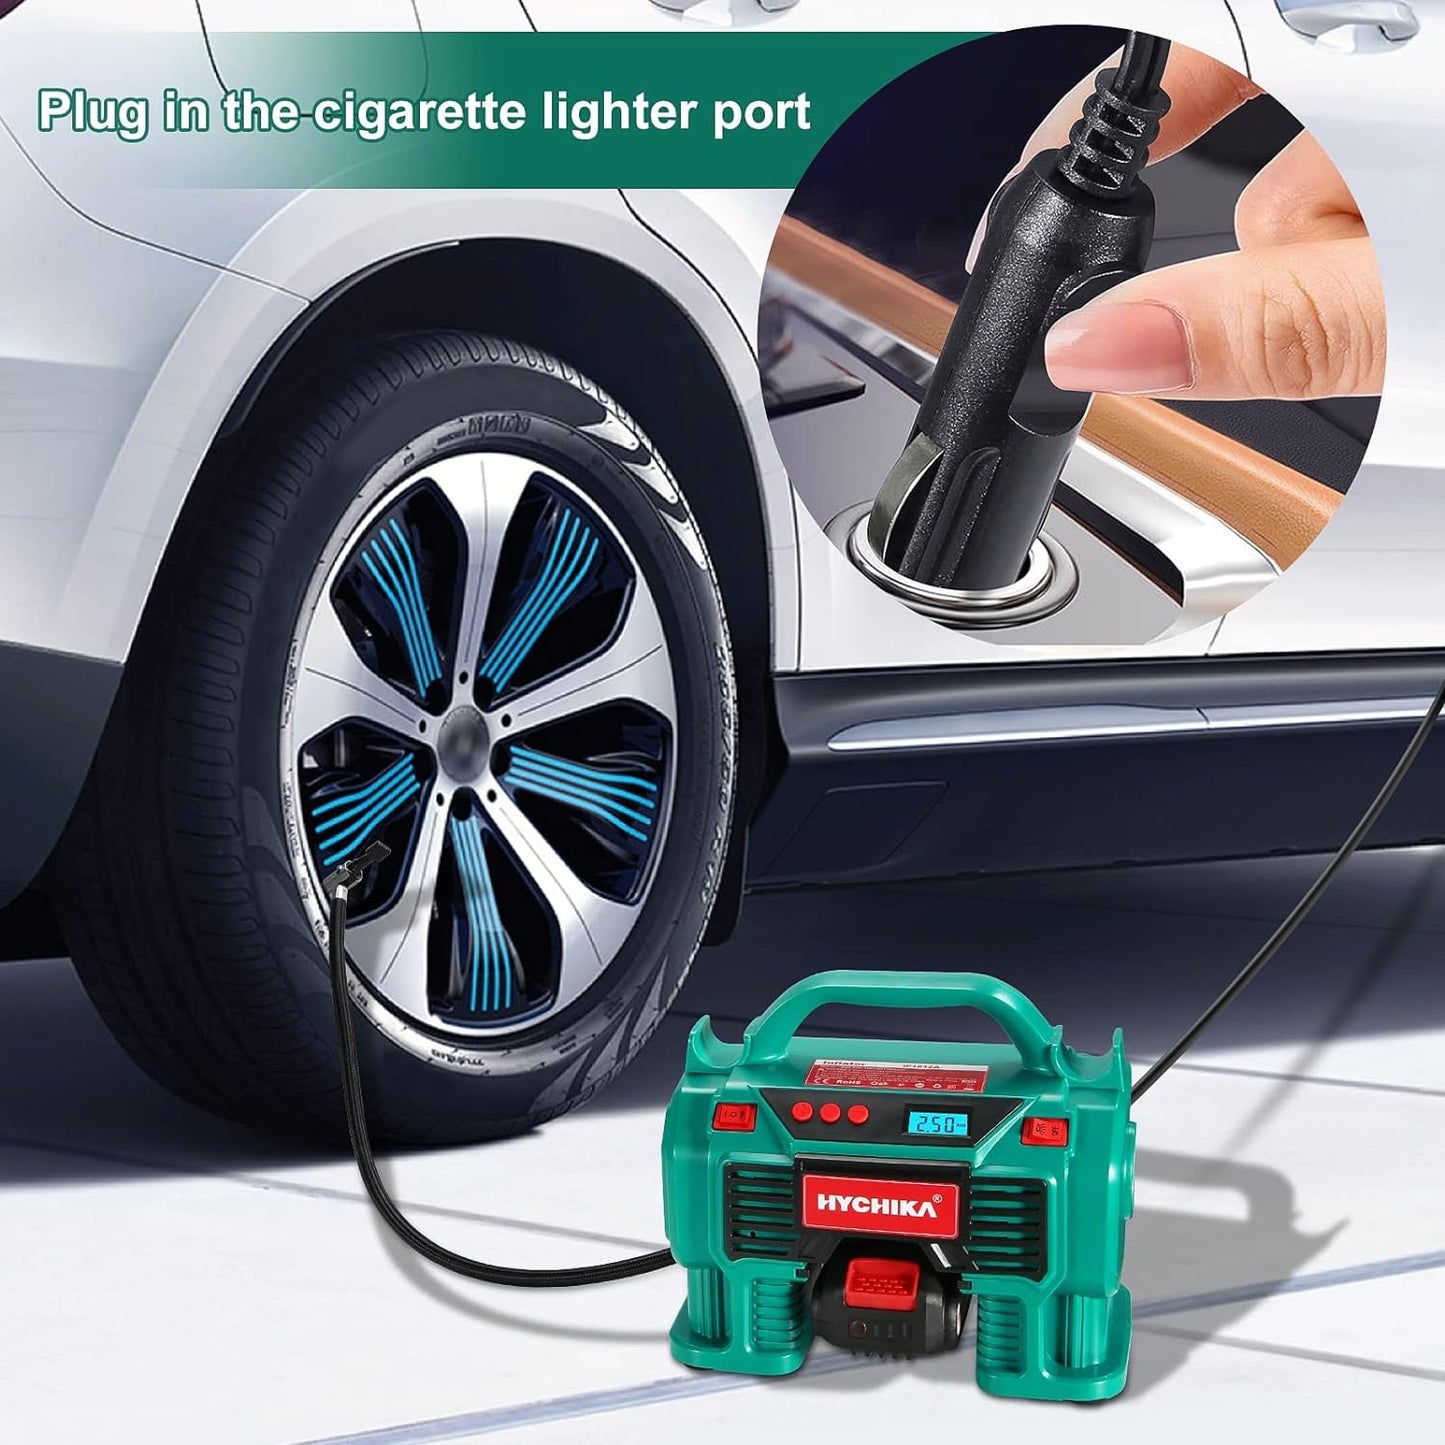 Tire Inflator, HYCHIKA Portable Air Compressor Pump 160PSI 20V Battery & 12V DC Dual Power Supply with LED Light, Pressure Gauge for Car Bike Inflatables -Charger & 2.0Ah Battery Included